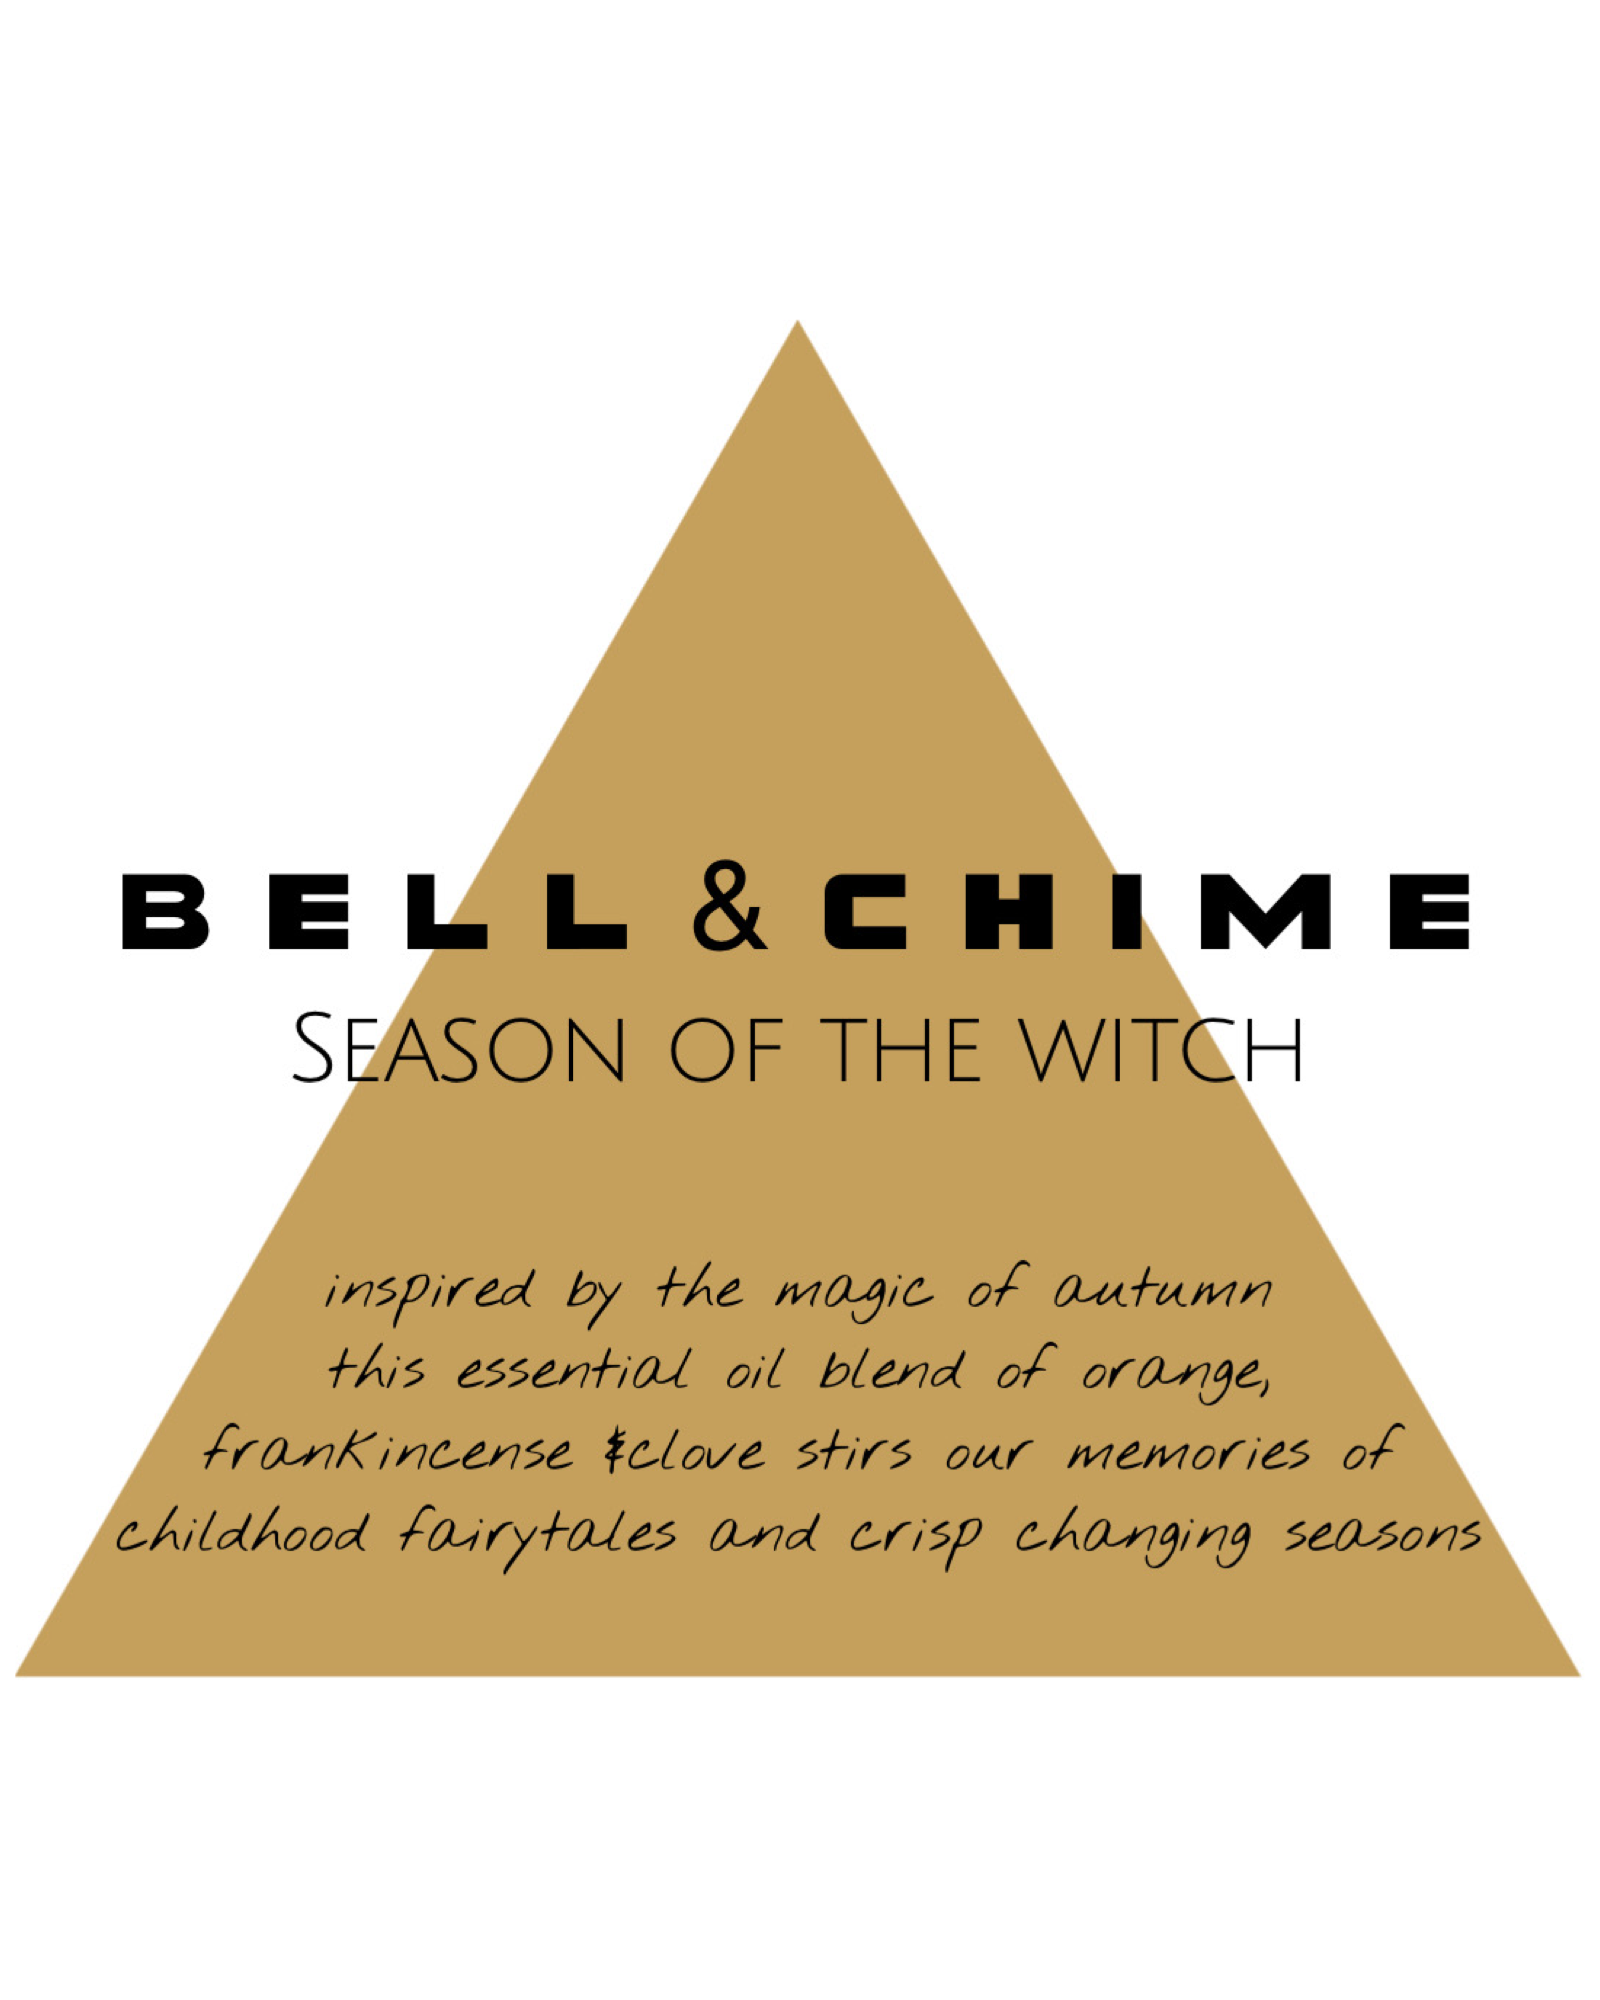 Bell & Chime "Season of the Witch" inspired by the magic of autumn this essential oil blend of orange, frankincense and clove stirs our memories of childhood fairytales and crisp changing seasons.